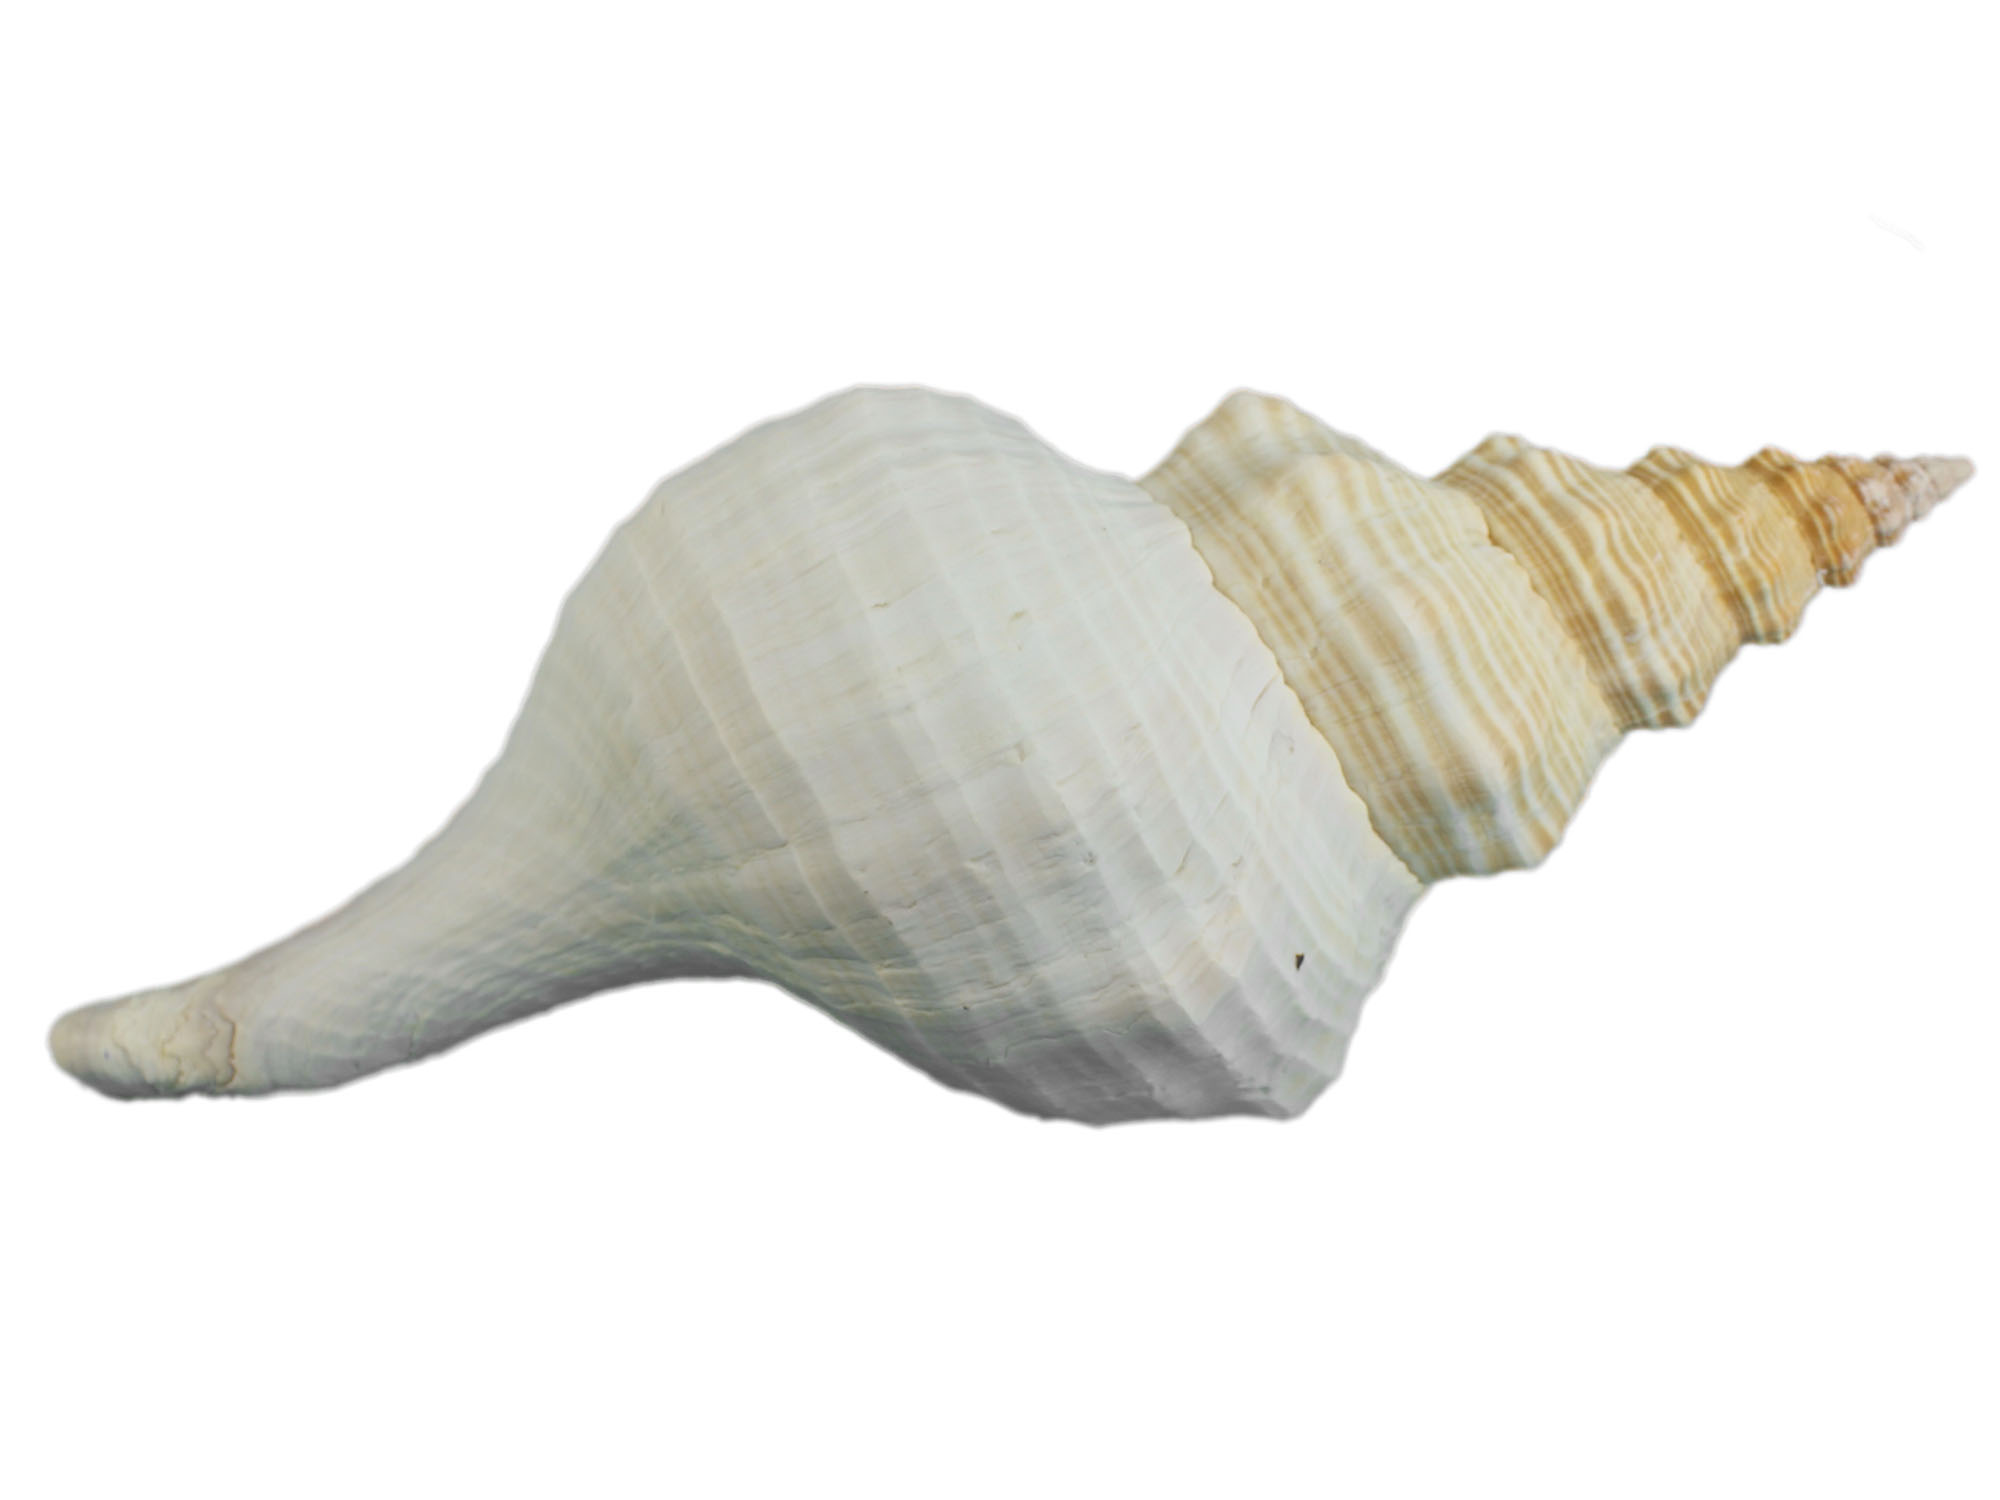 Mexican Horse Conch Shell: 14" to 15" Florida horse conch, sea snail shell